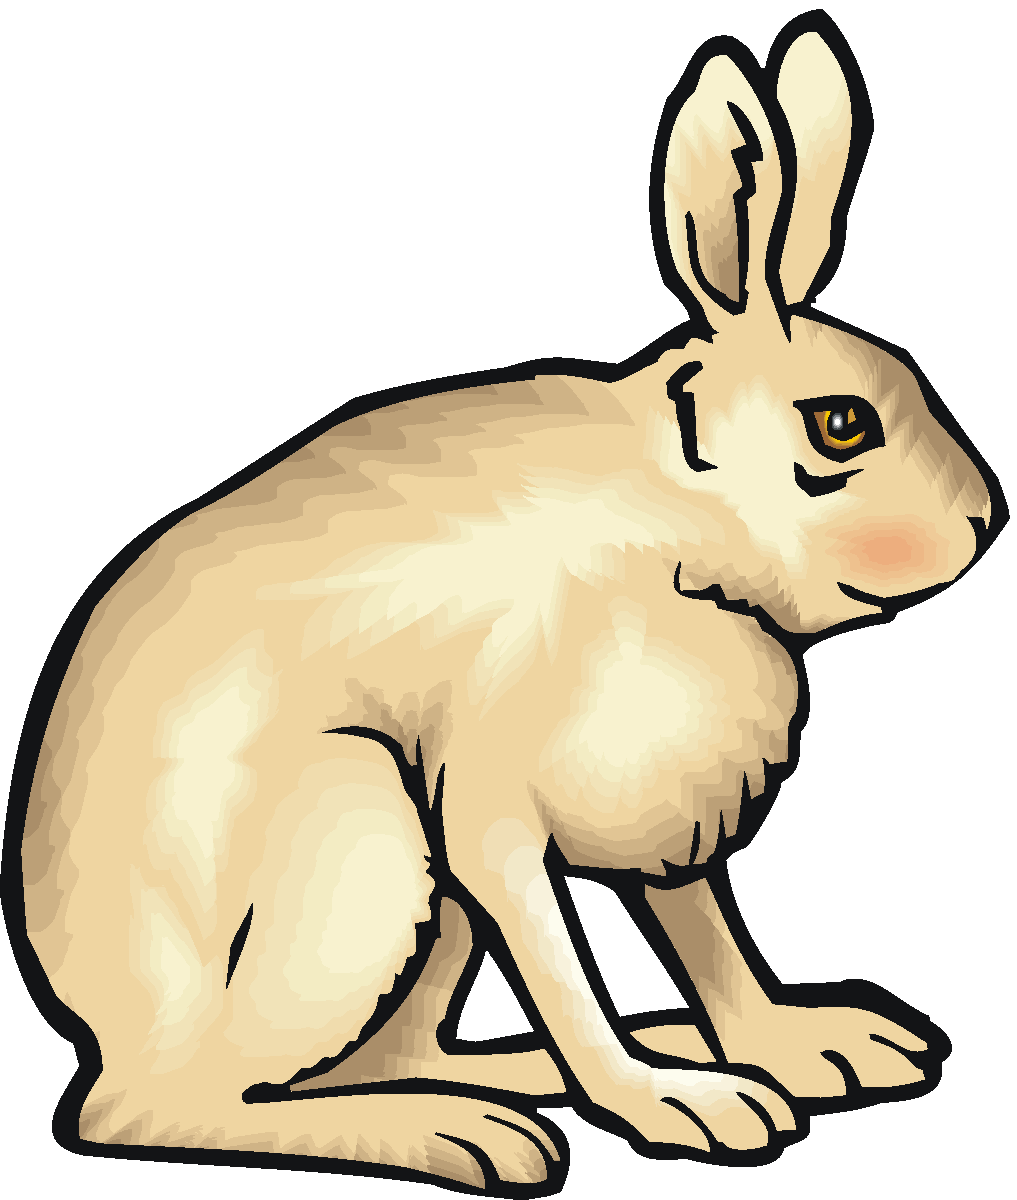 Images For > Tortoise And Hare Clip Art